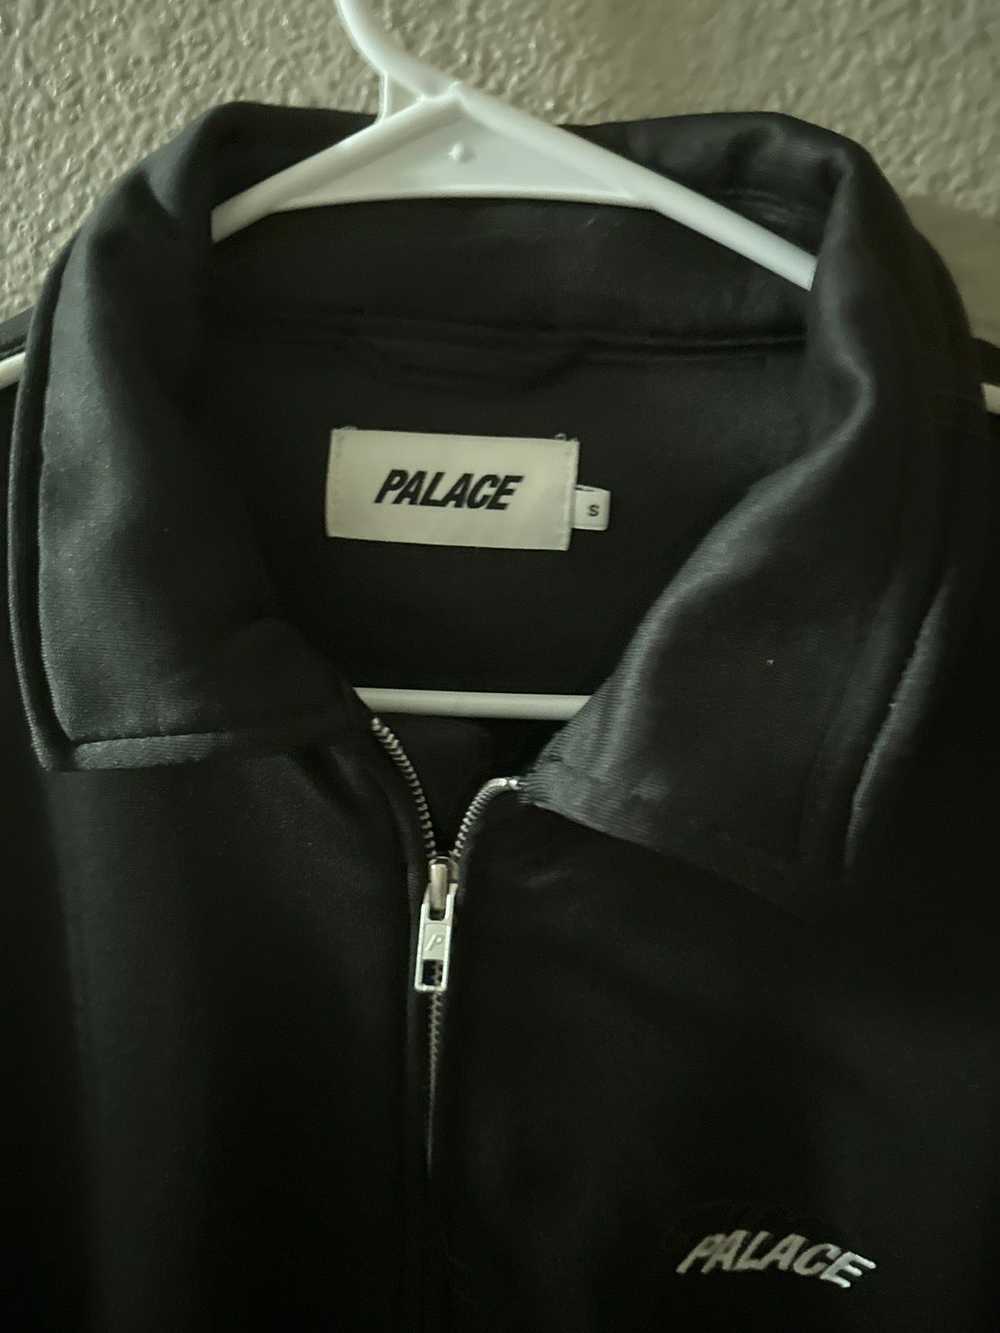 Palace Palace Relax Track Top - image 2